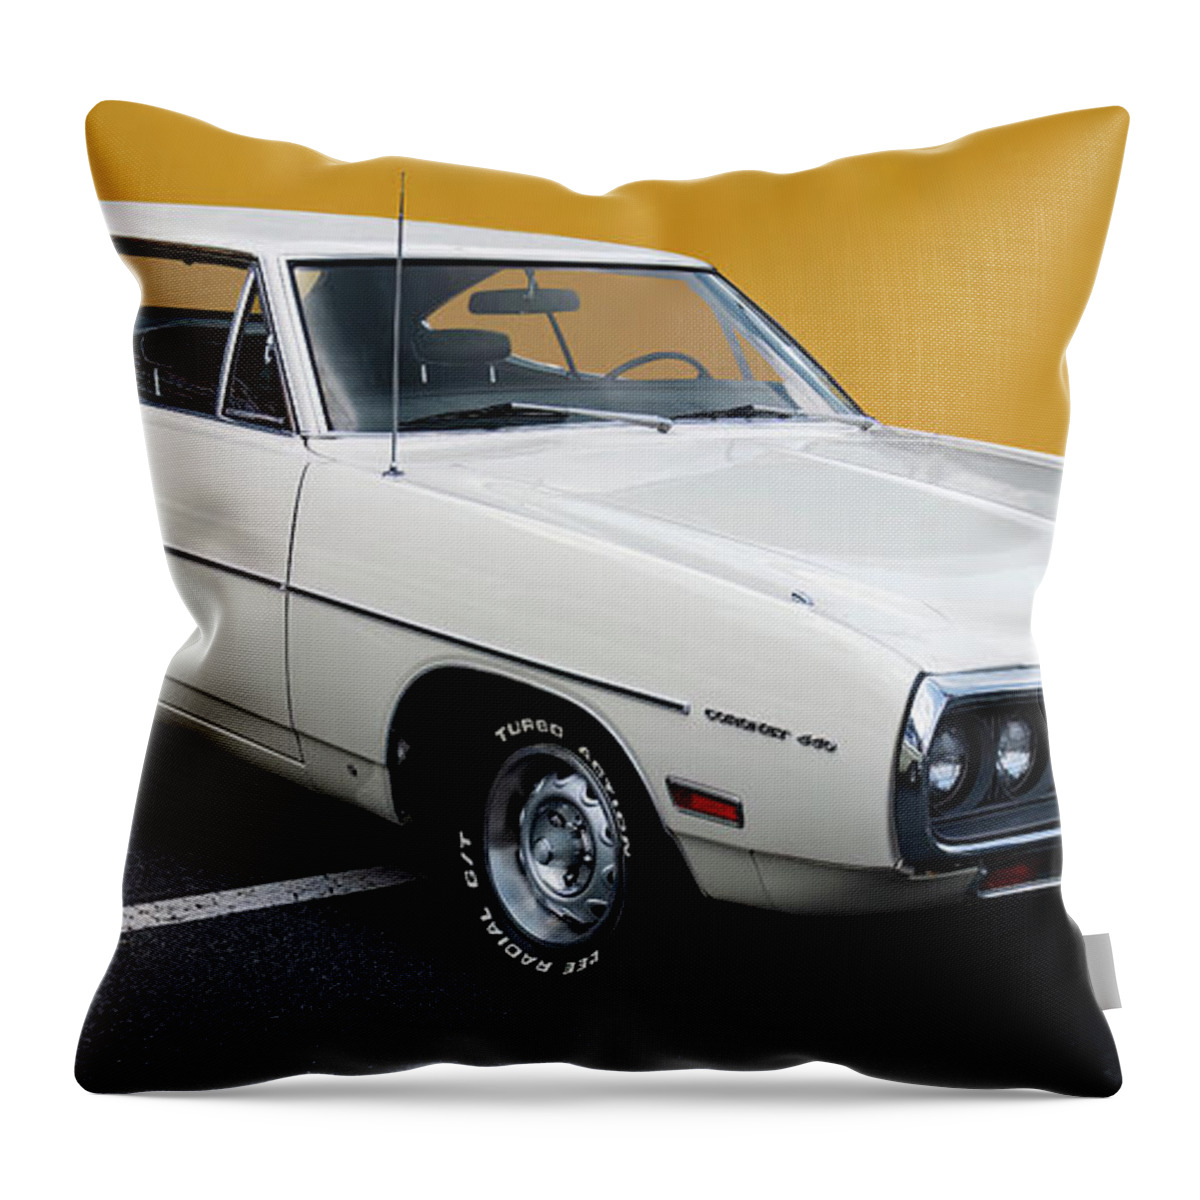 1970 Dodge Coronet 440 Throw Pillow featuring the photograph 1970 Dodge Coronet 440 by Flees Photos